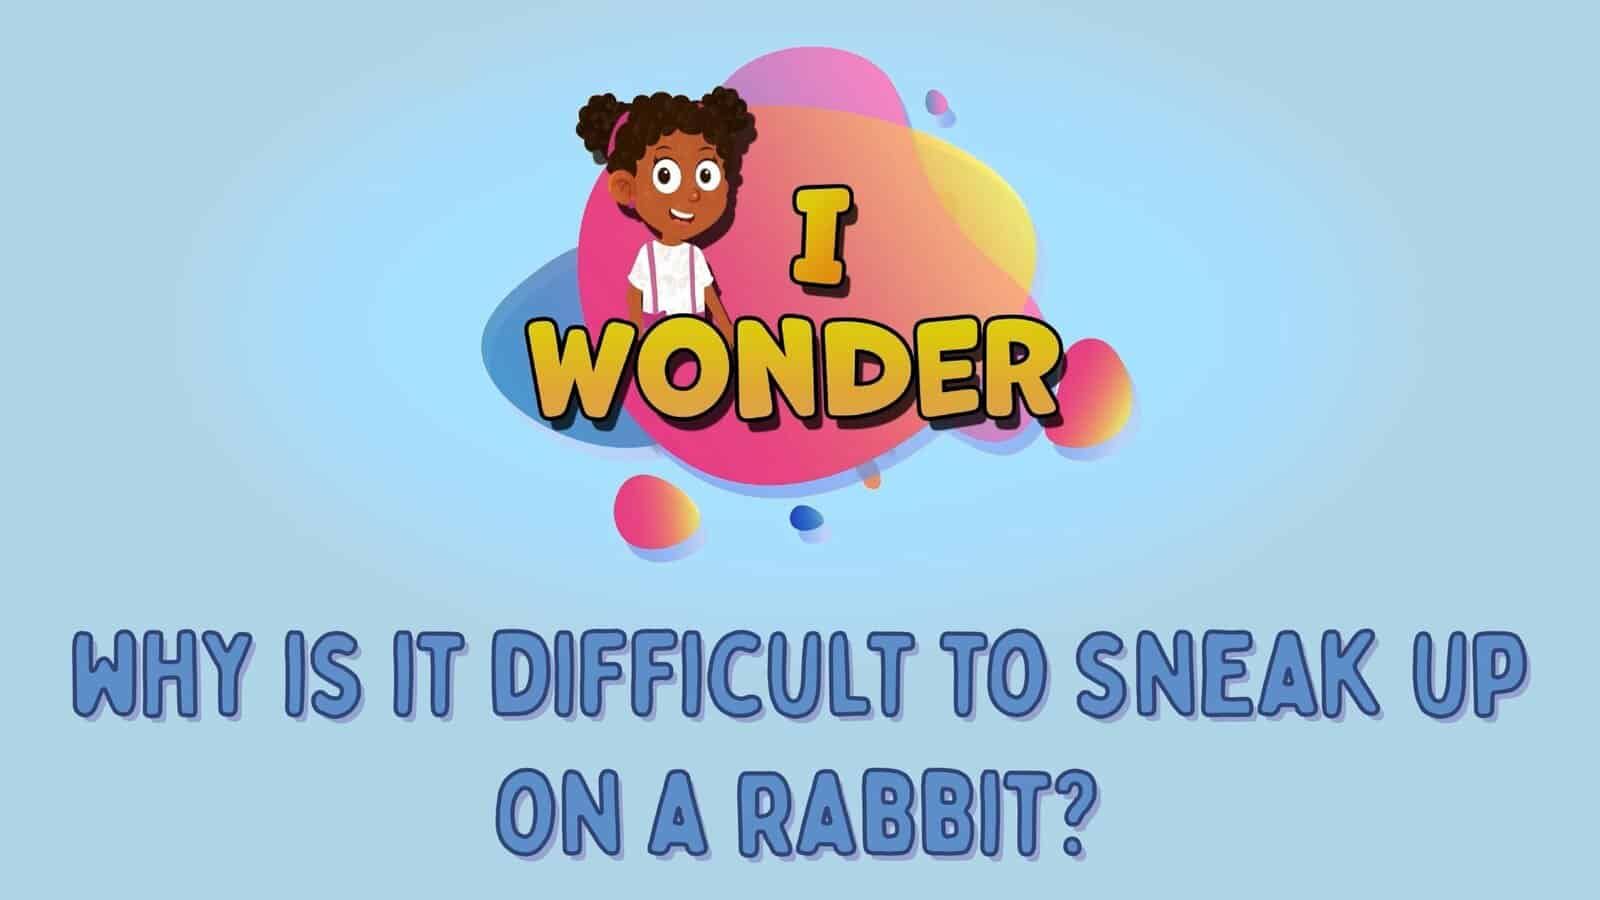 Why Is It Difficult To Sneak Up On A Rabbit?